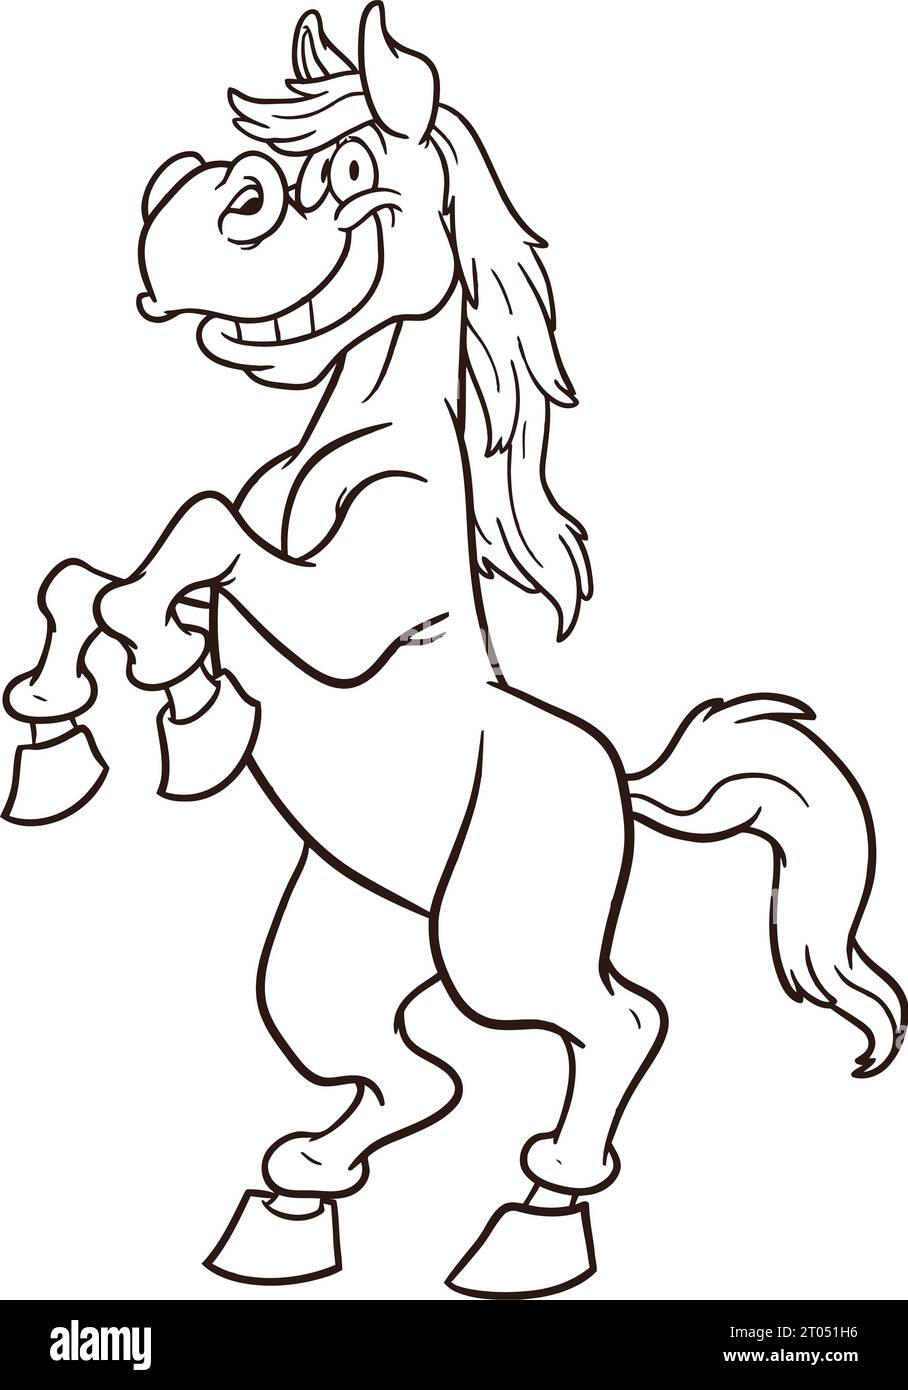 Cartoon horse standing on two legs Coloring page for kids Stock Photo